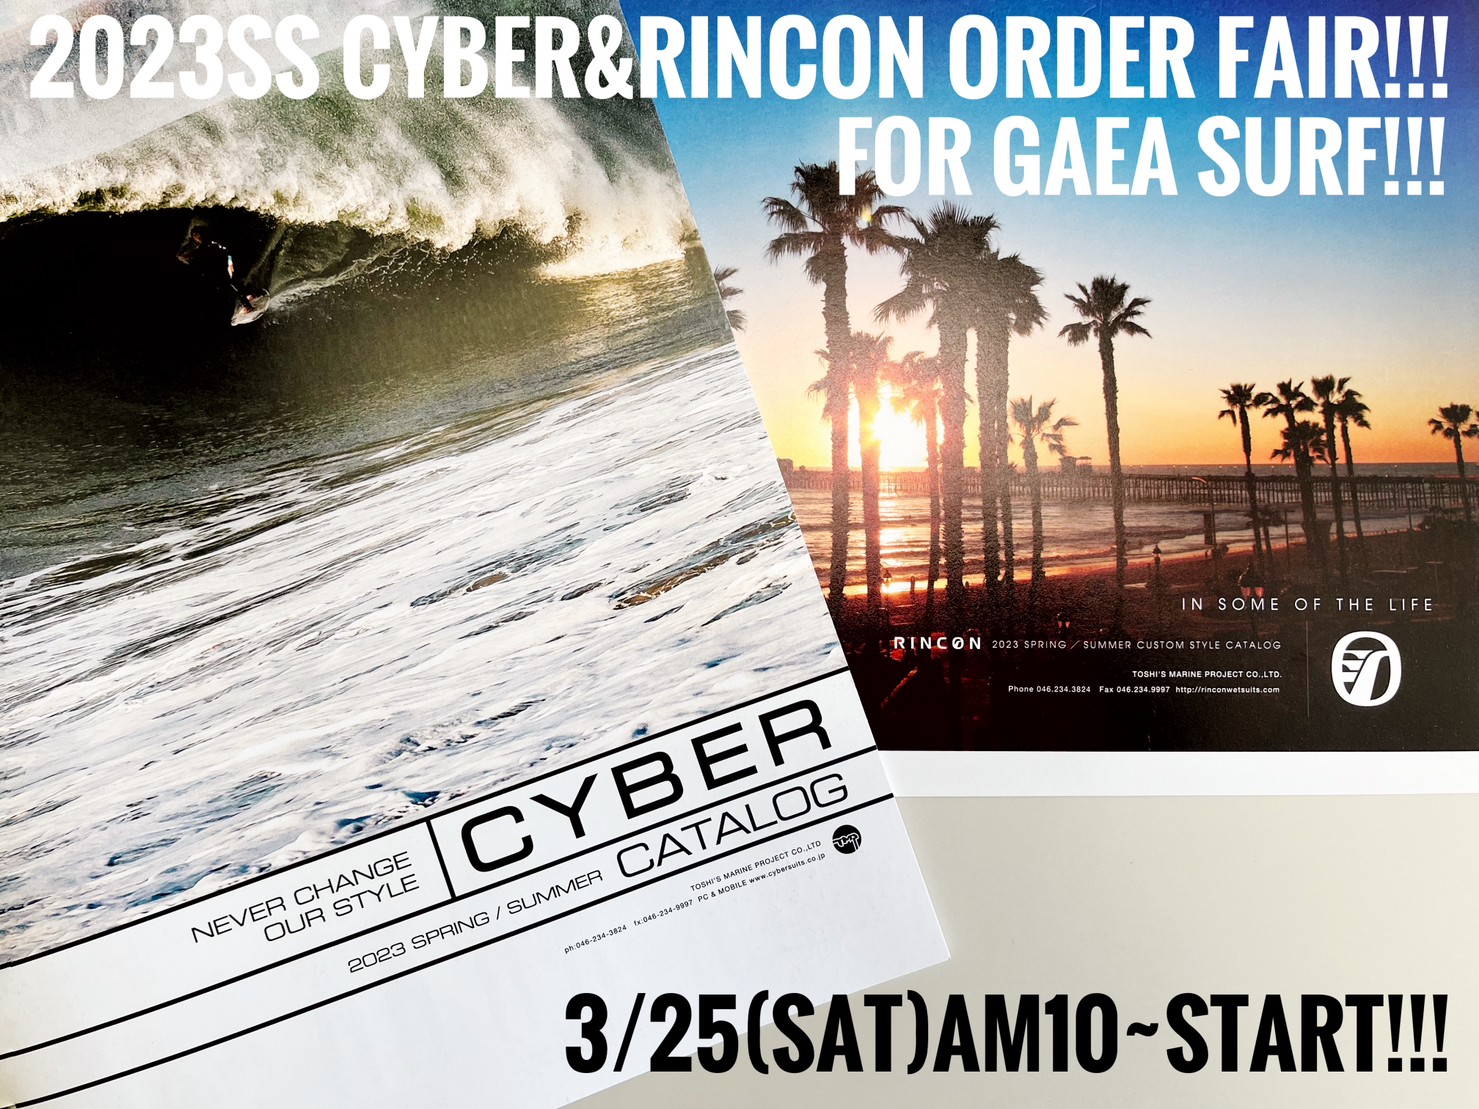 Cyber & Rincon １日限定春ものフェア開催！